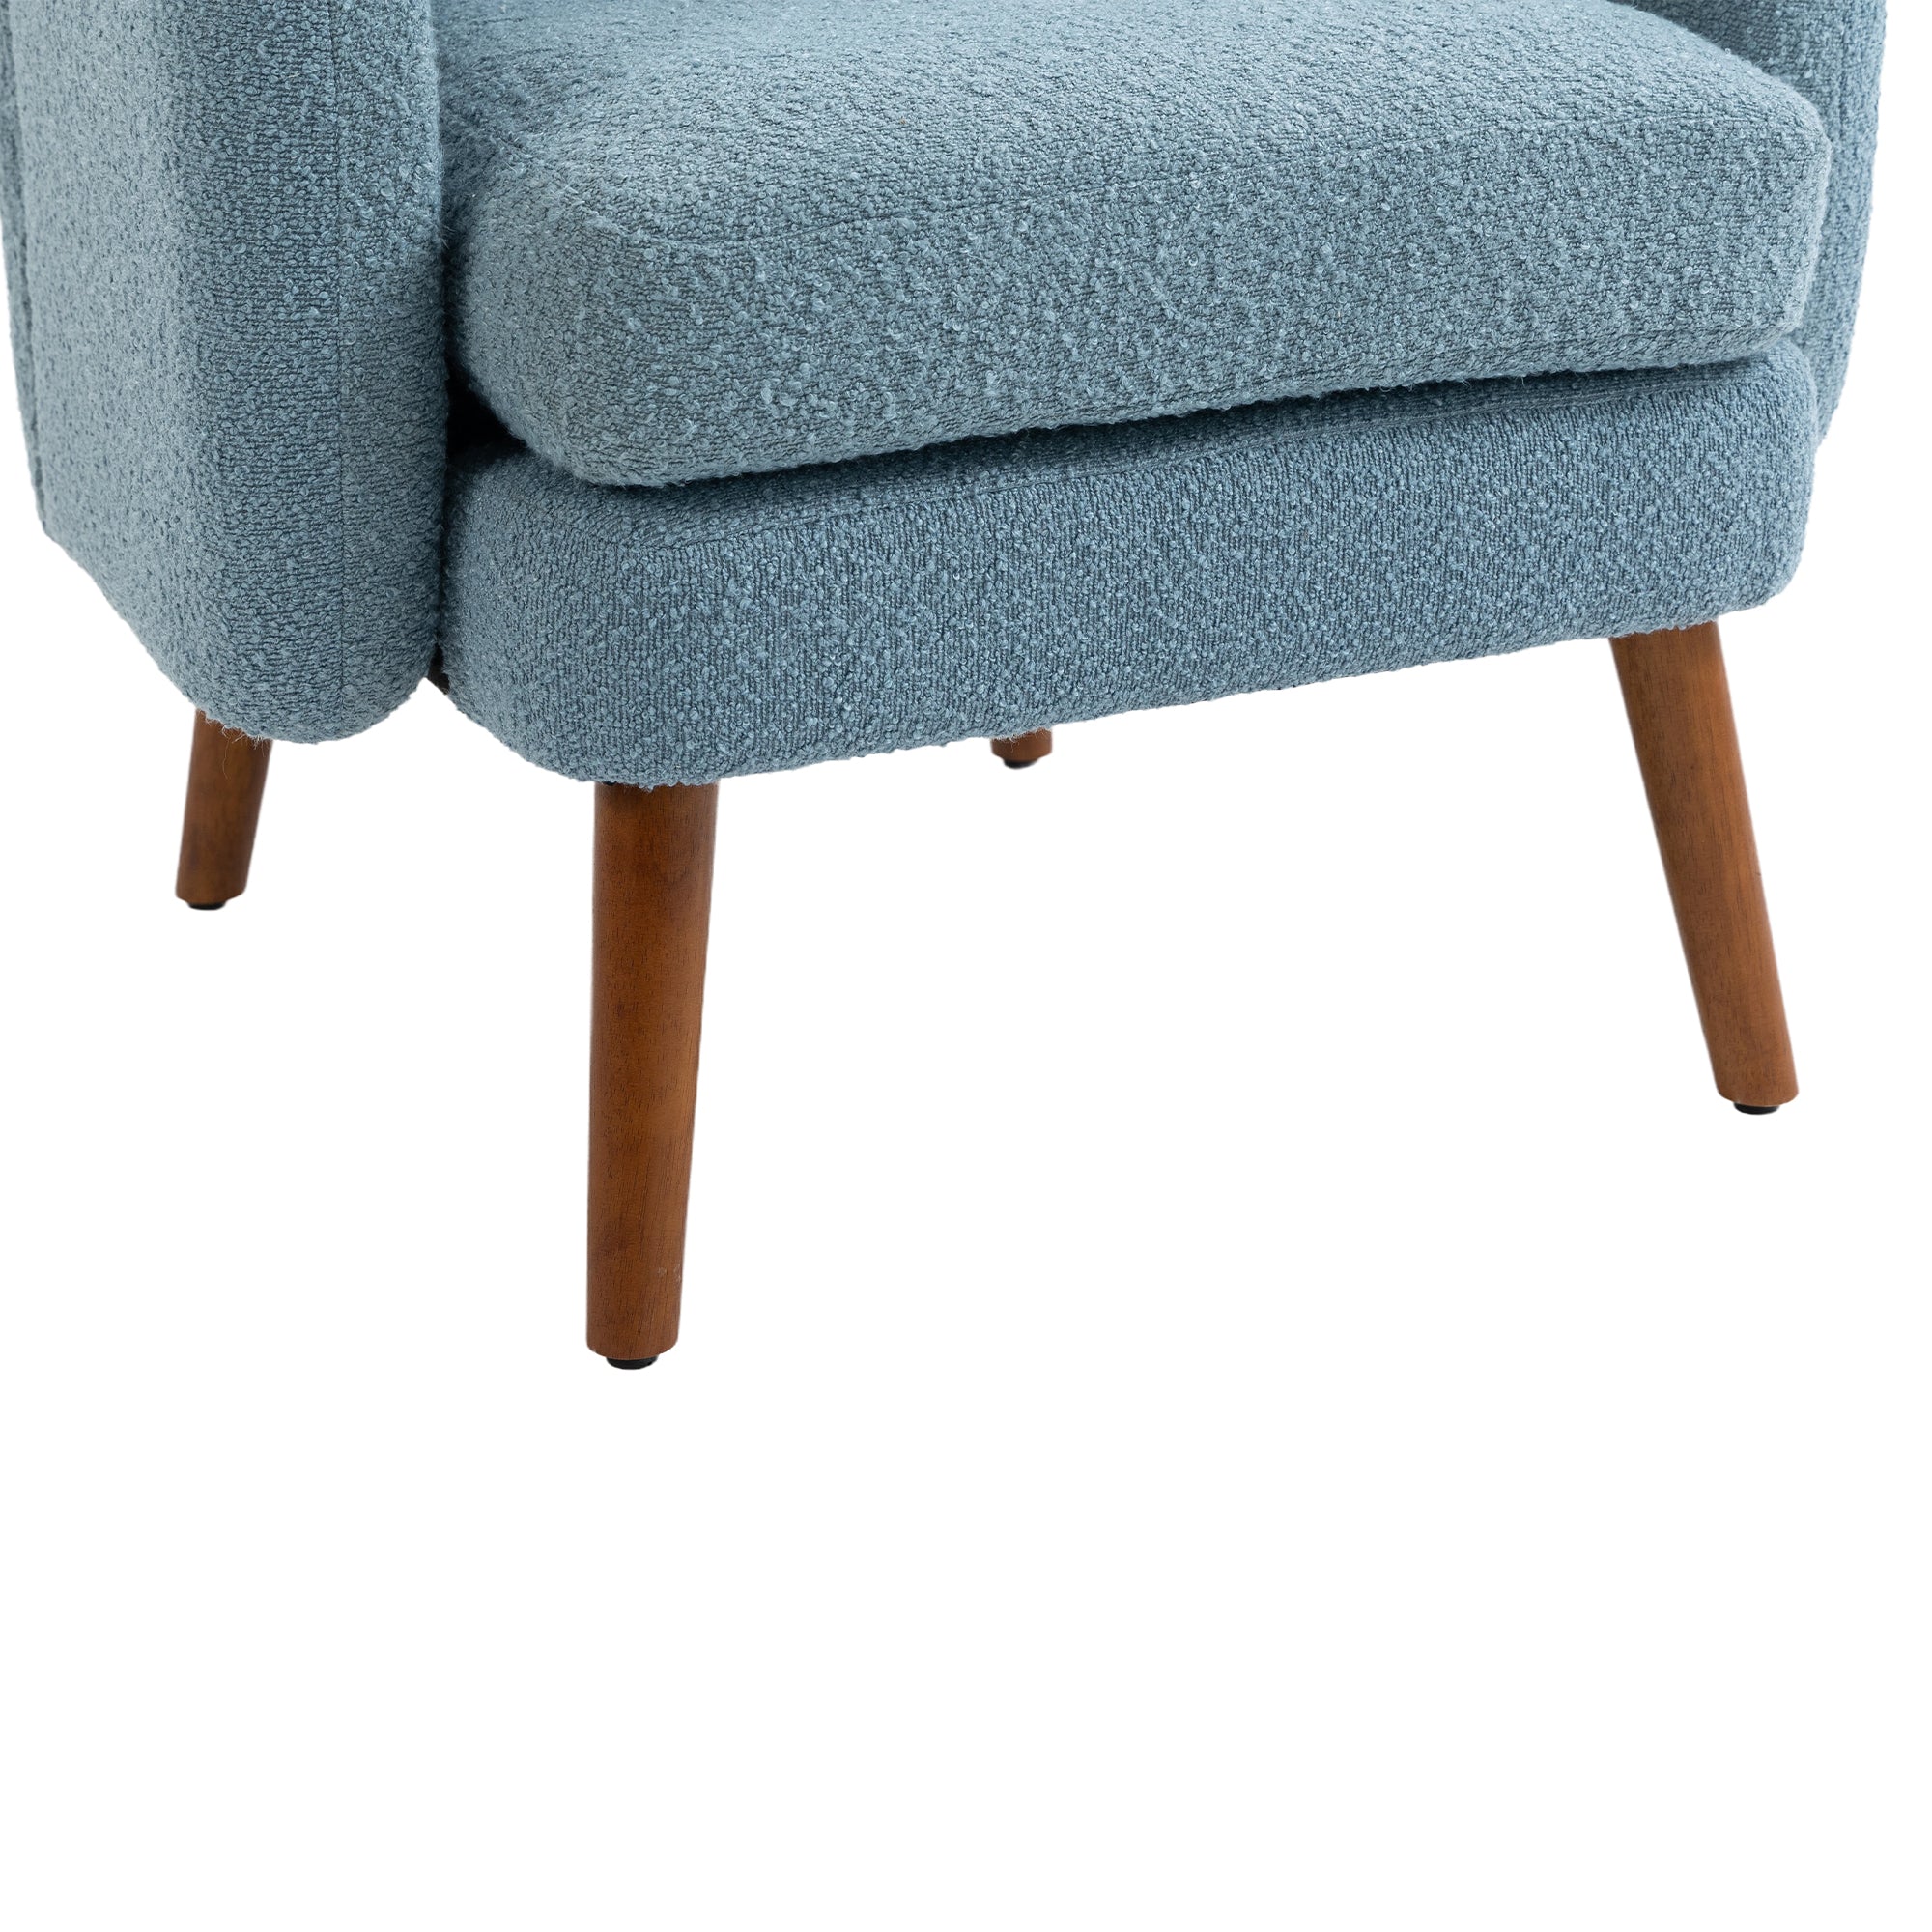 COOLMORE Wood Frame Armchair, Modern Accent Chair light blue-boucle